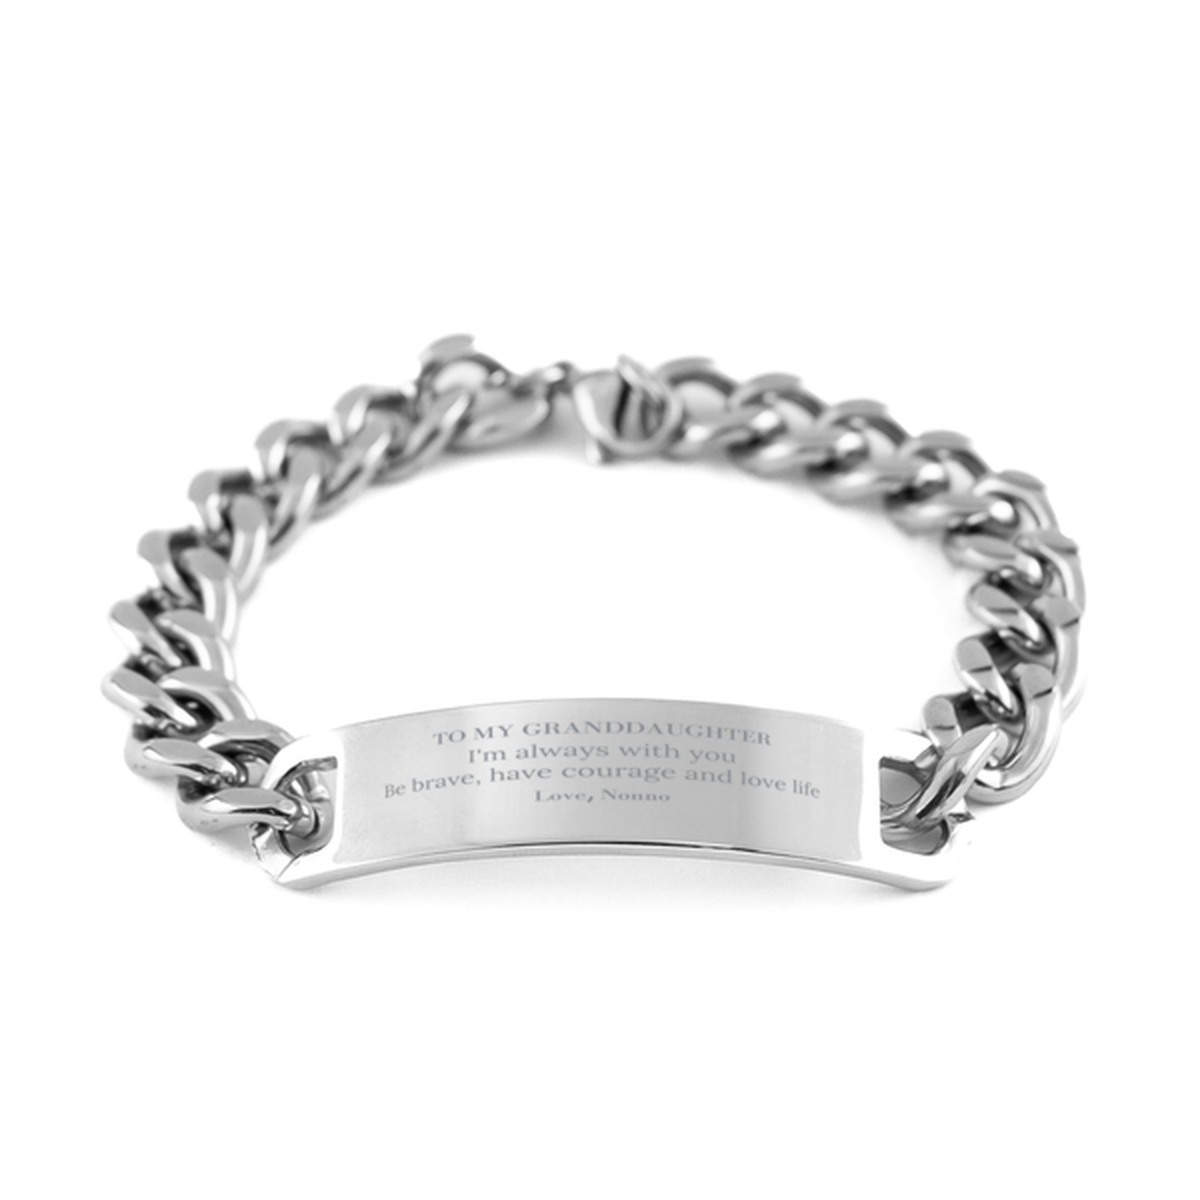 To My Granddaughter Gifts from Nonno, Unique Cuban Chain Stainless Steel Bracelet Inspirational Christmas Birthday Graduation Gifts for Granddaughter I'm always with you. Be brave, have courage and love life. Love, Nonno